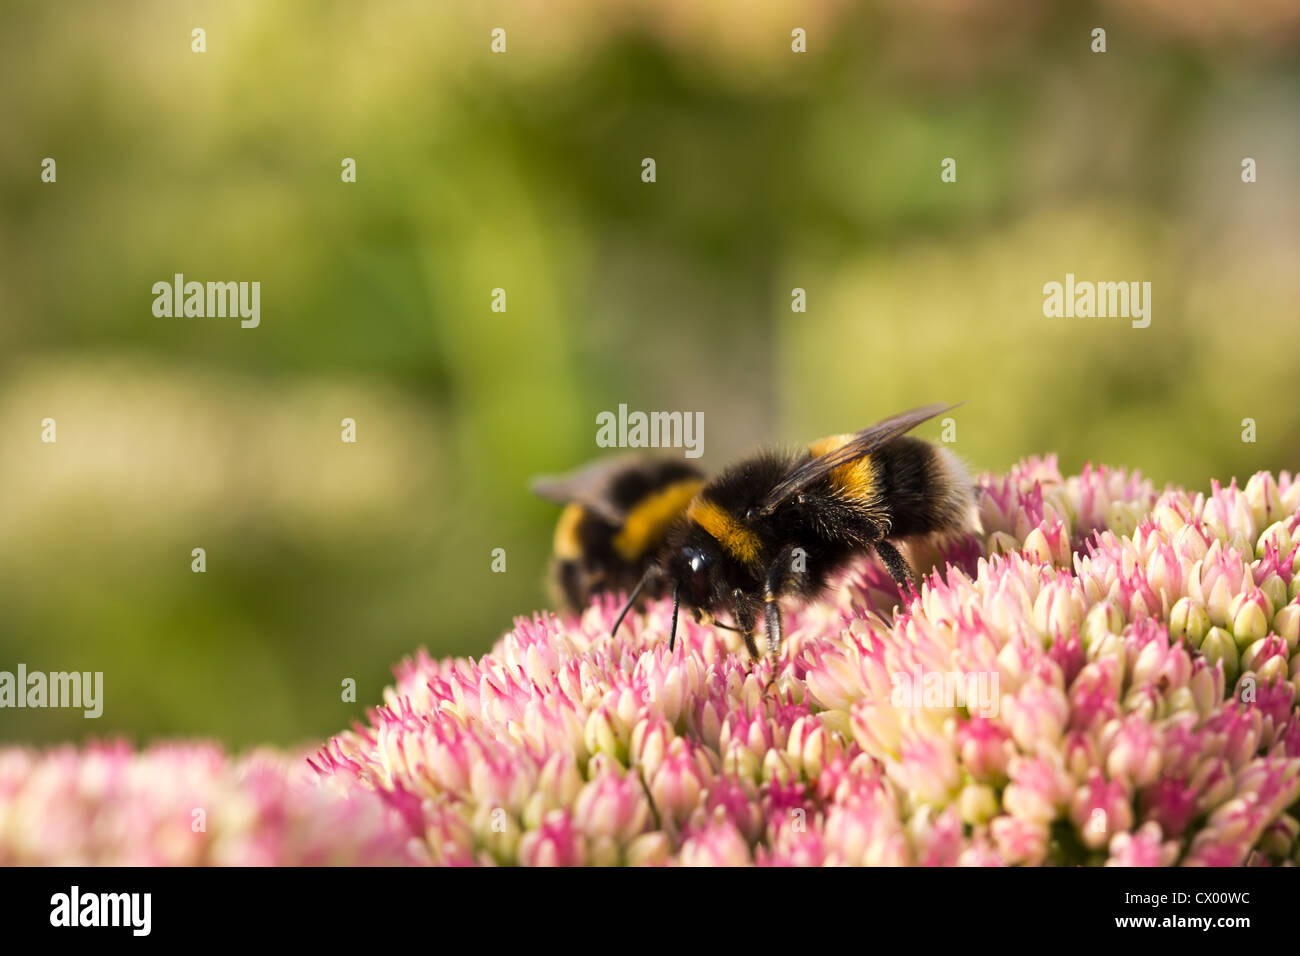 Bees on a flower Stock Photo